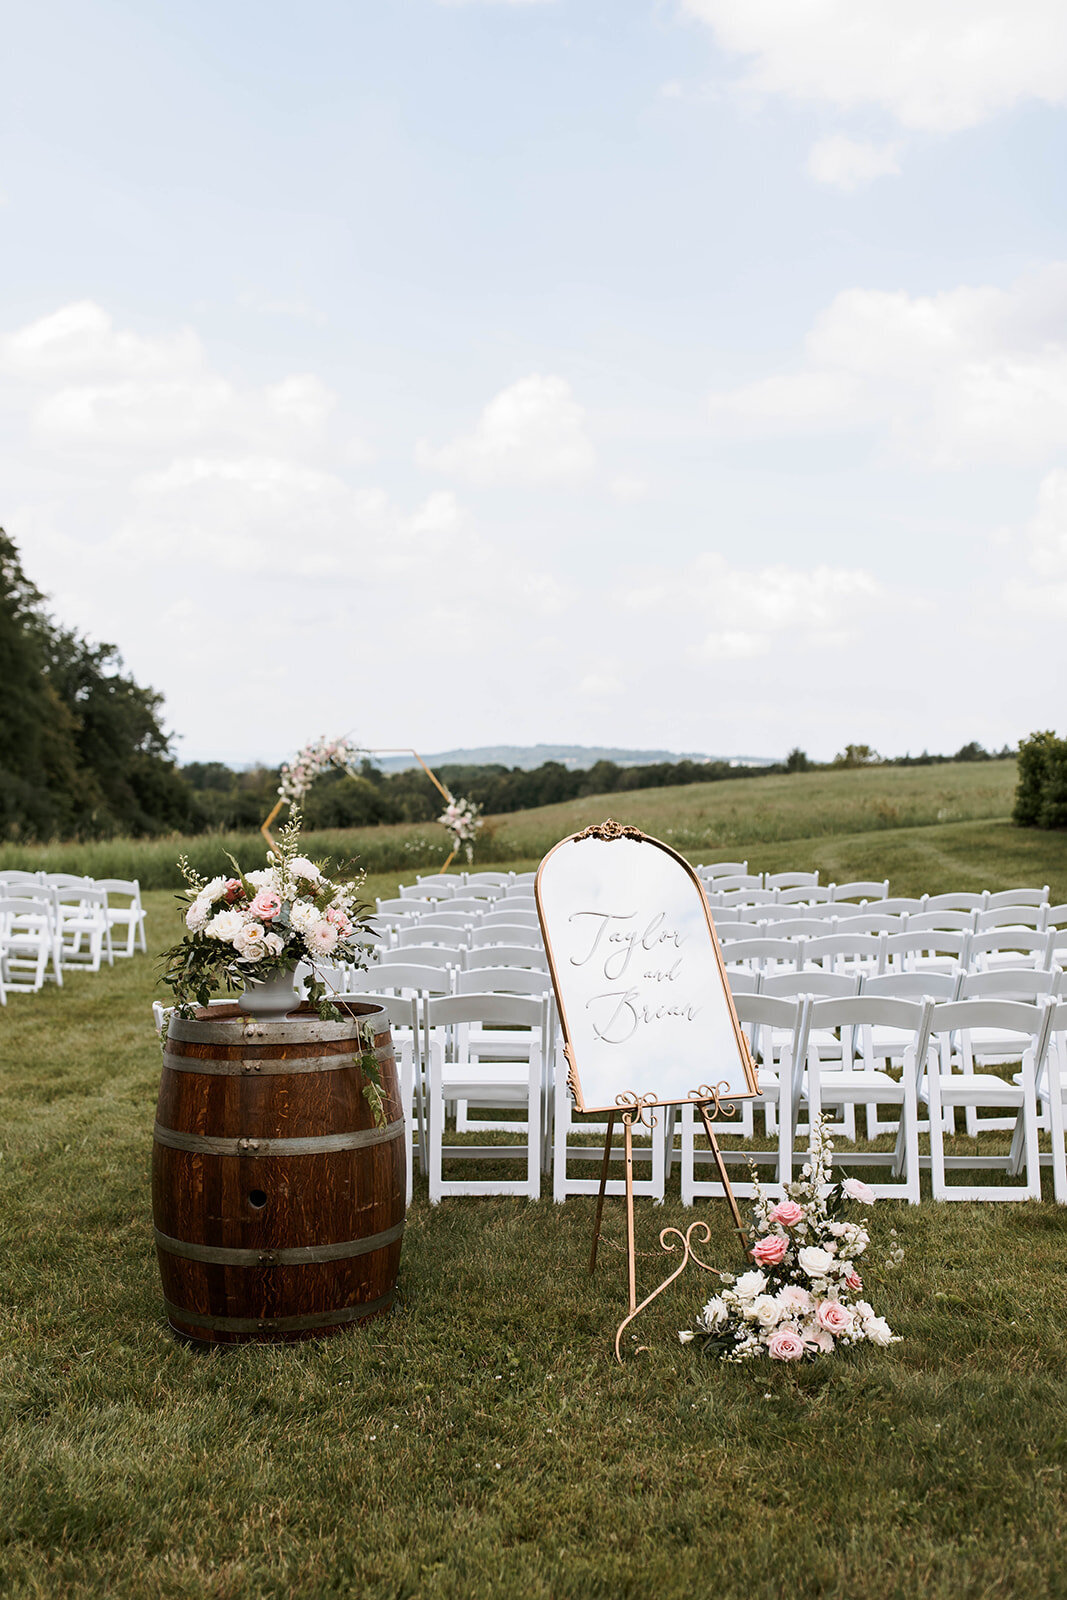 outdoor wedding ceremony in upstate new york with barrel aisle caps and mirror welcome sign